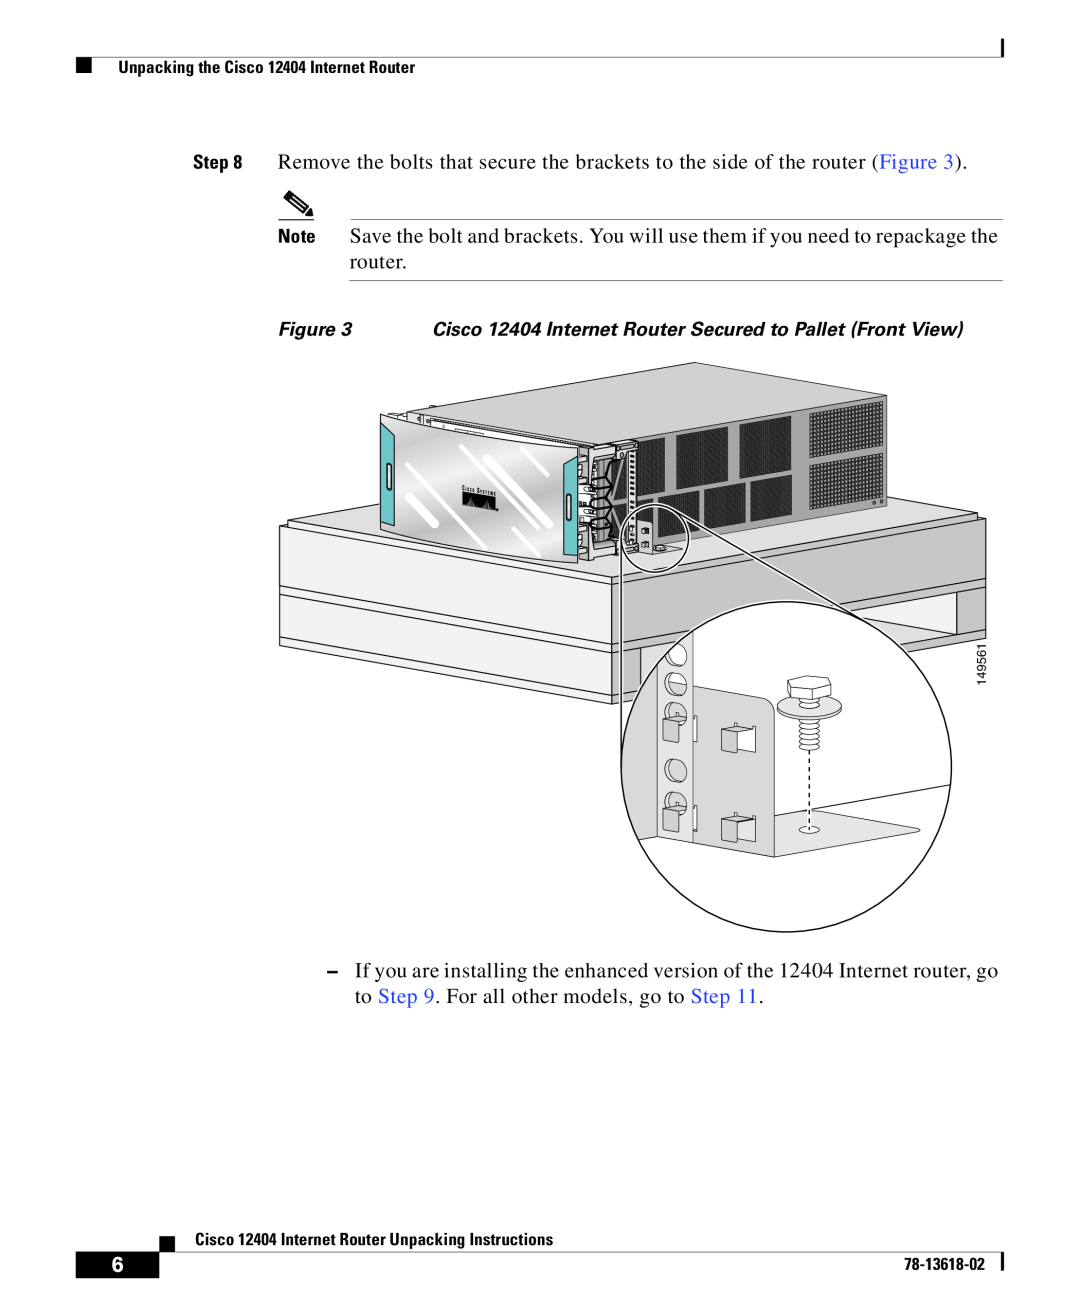 Cisco Systems manual Cisco 12404 Internet Router Secured to Pallet Front View, Consolidate Bric 